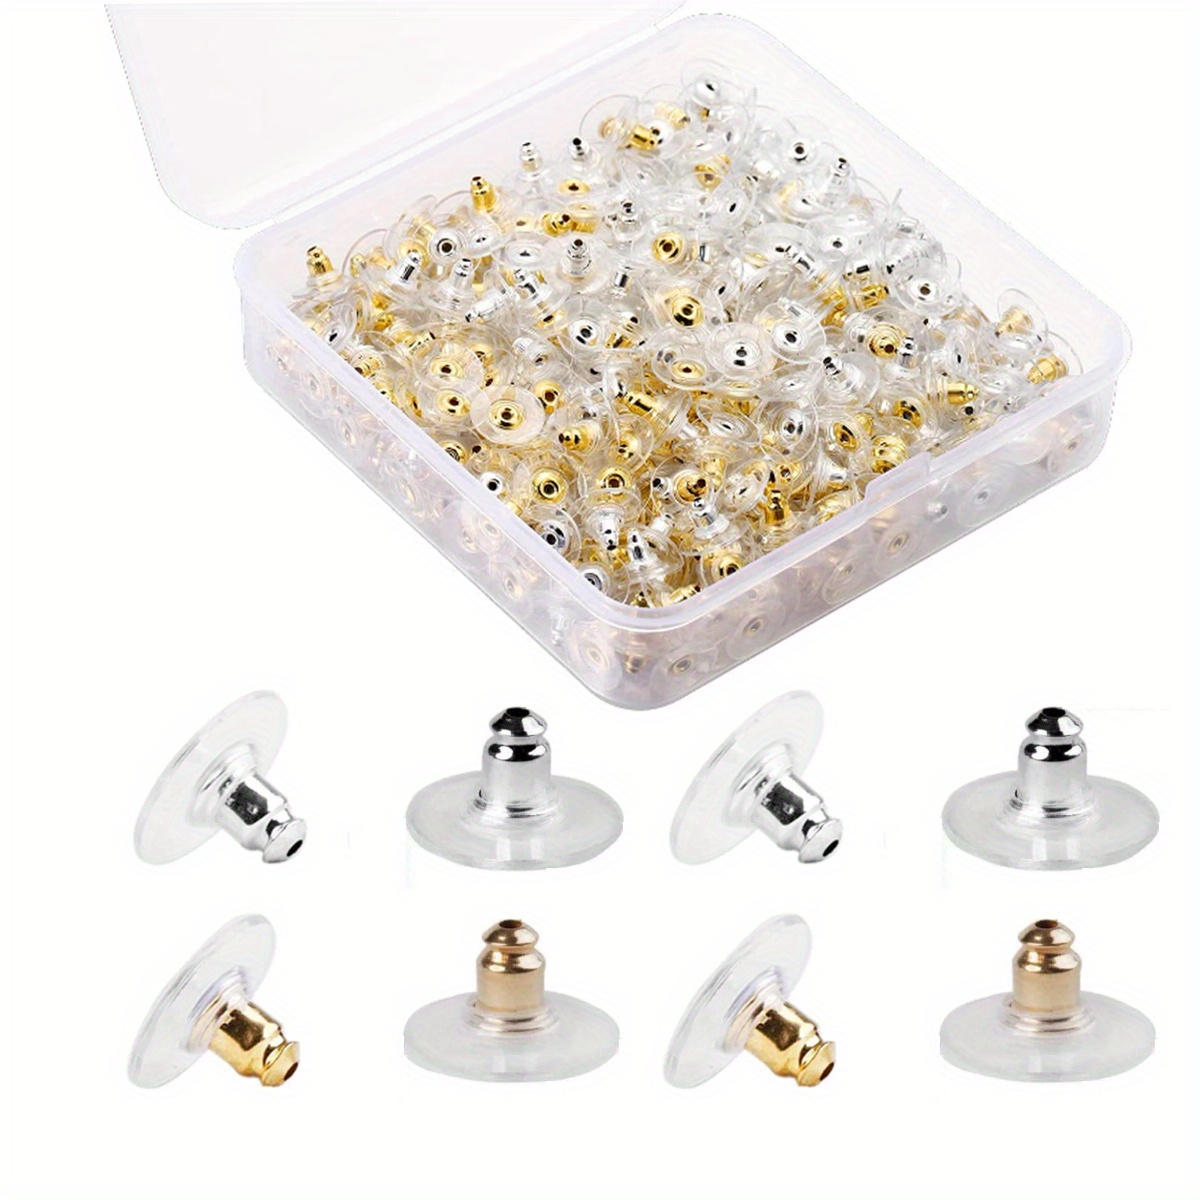 Nkwuire 12 Styles 600 Pcs Earring Backs for Studs, Clear Plastic Earrings  Hypoallergenic Metal Rubber Silicone Earring Backs Bullet Clutch Stoppers